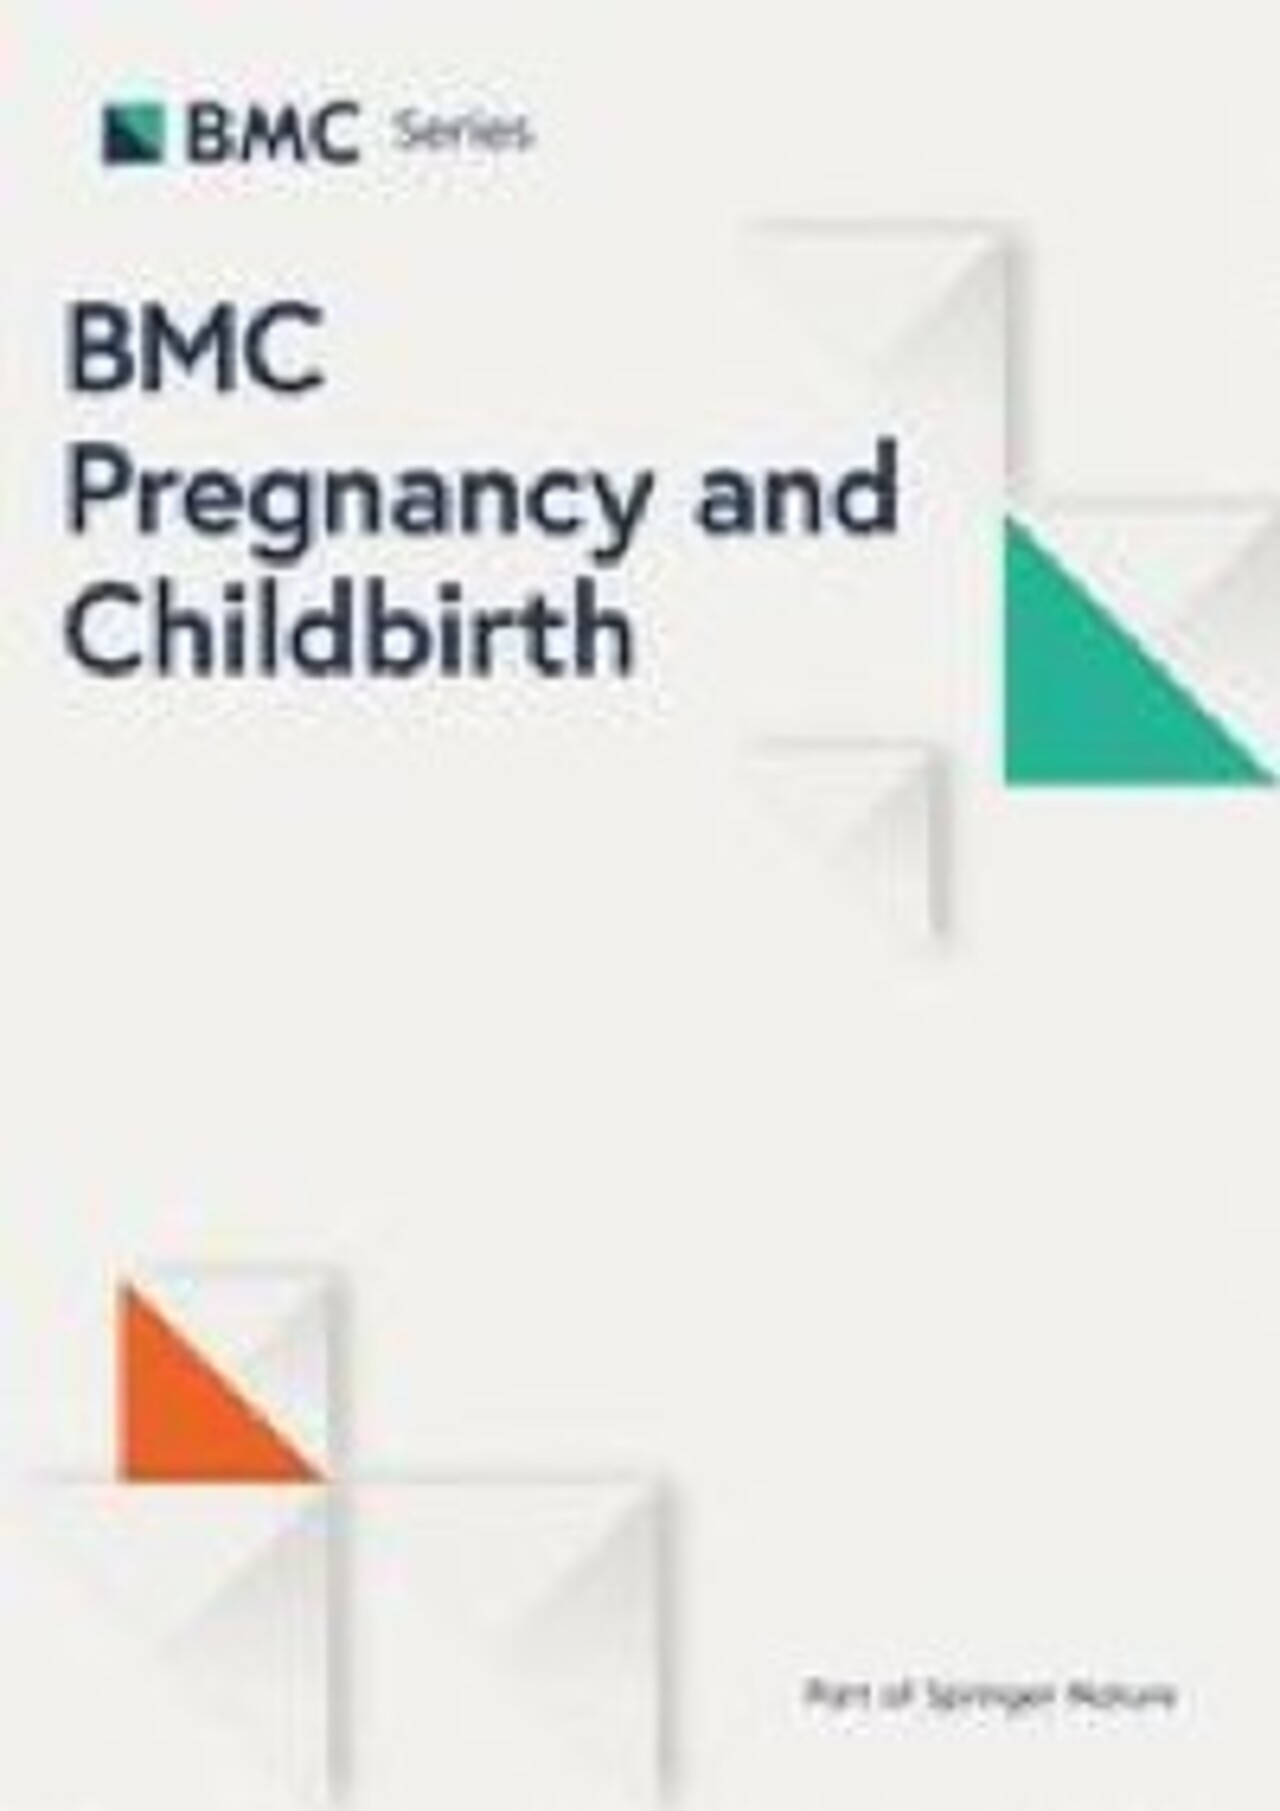 Mass incarceration and public health: the association between black jail incarceration and adverse birth outcomes among black women in Louisiana